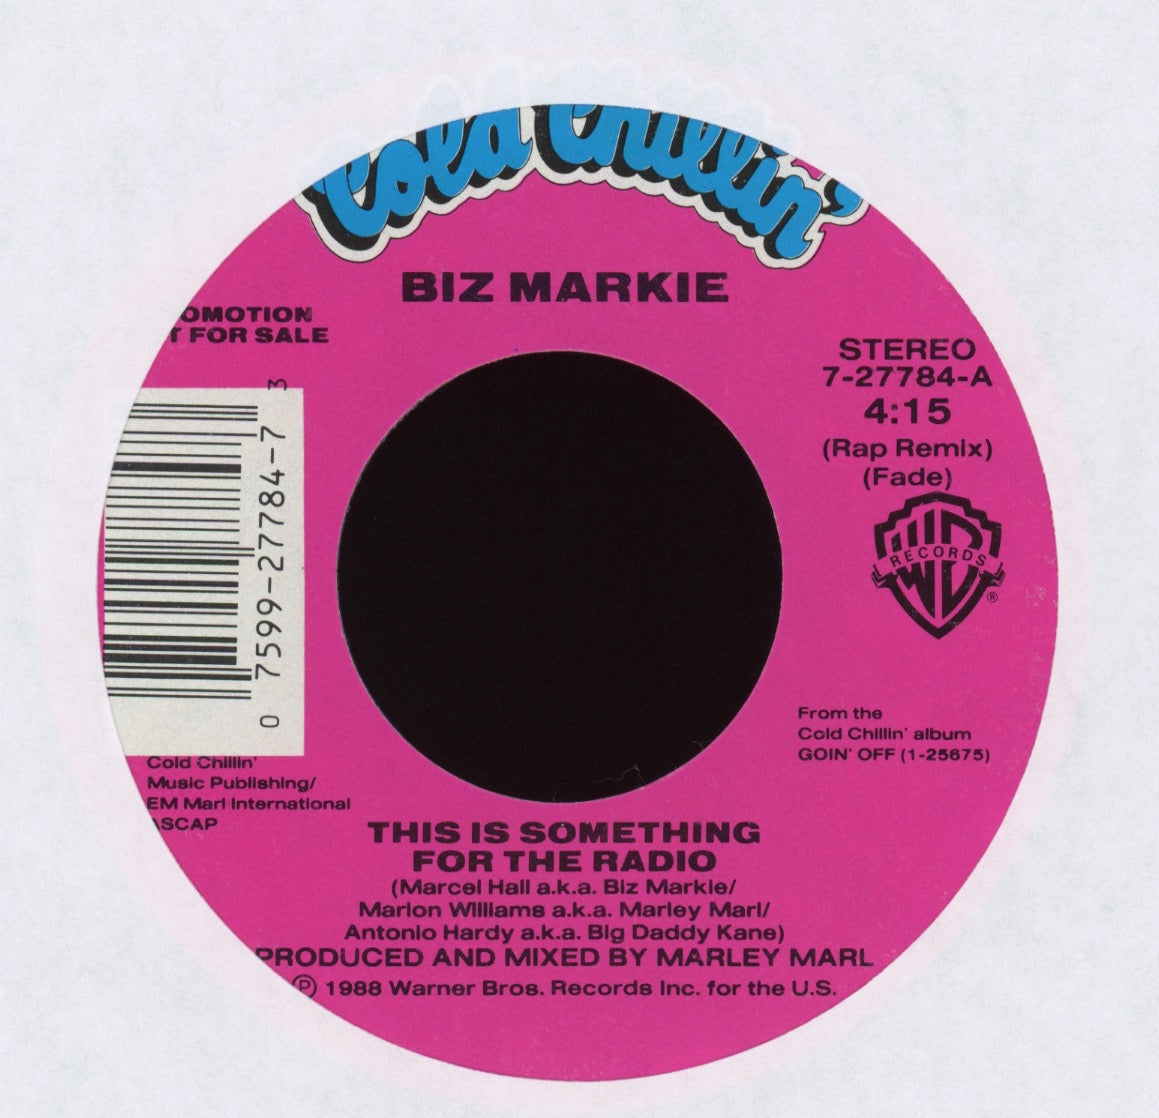 Biz Markie - This Is Something For The Radio on Cold Chillin' Promo